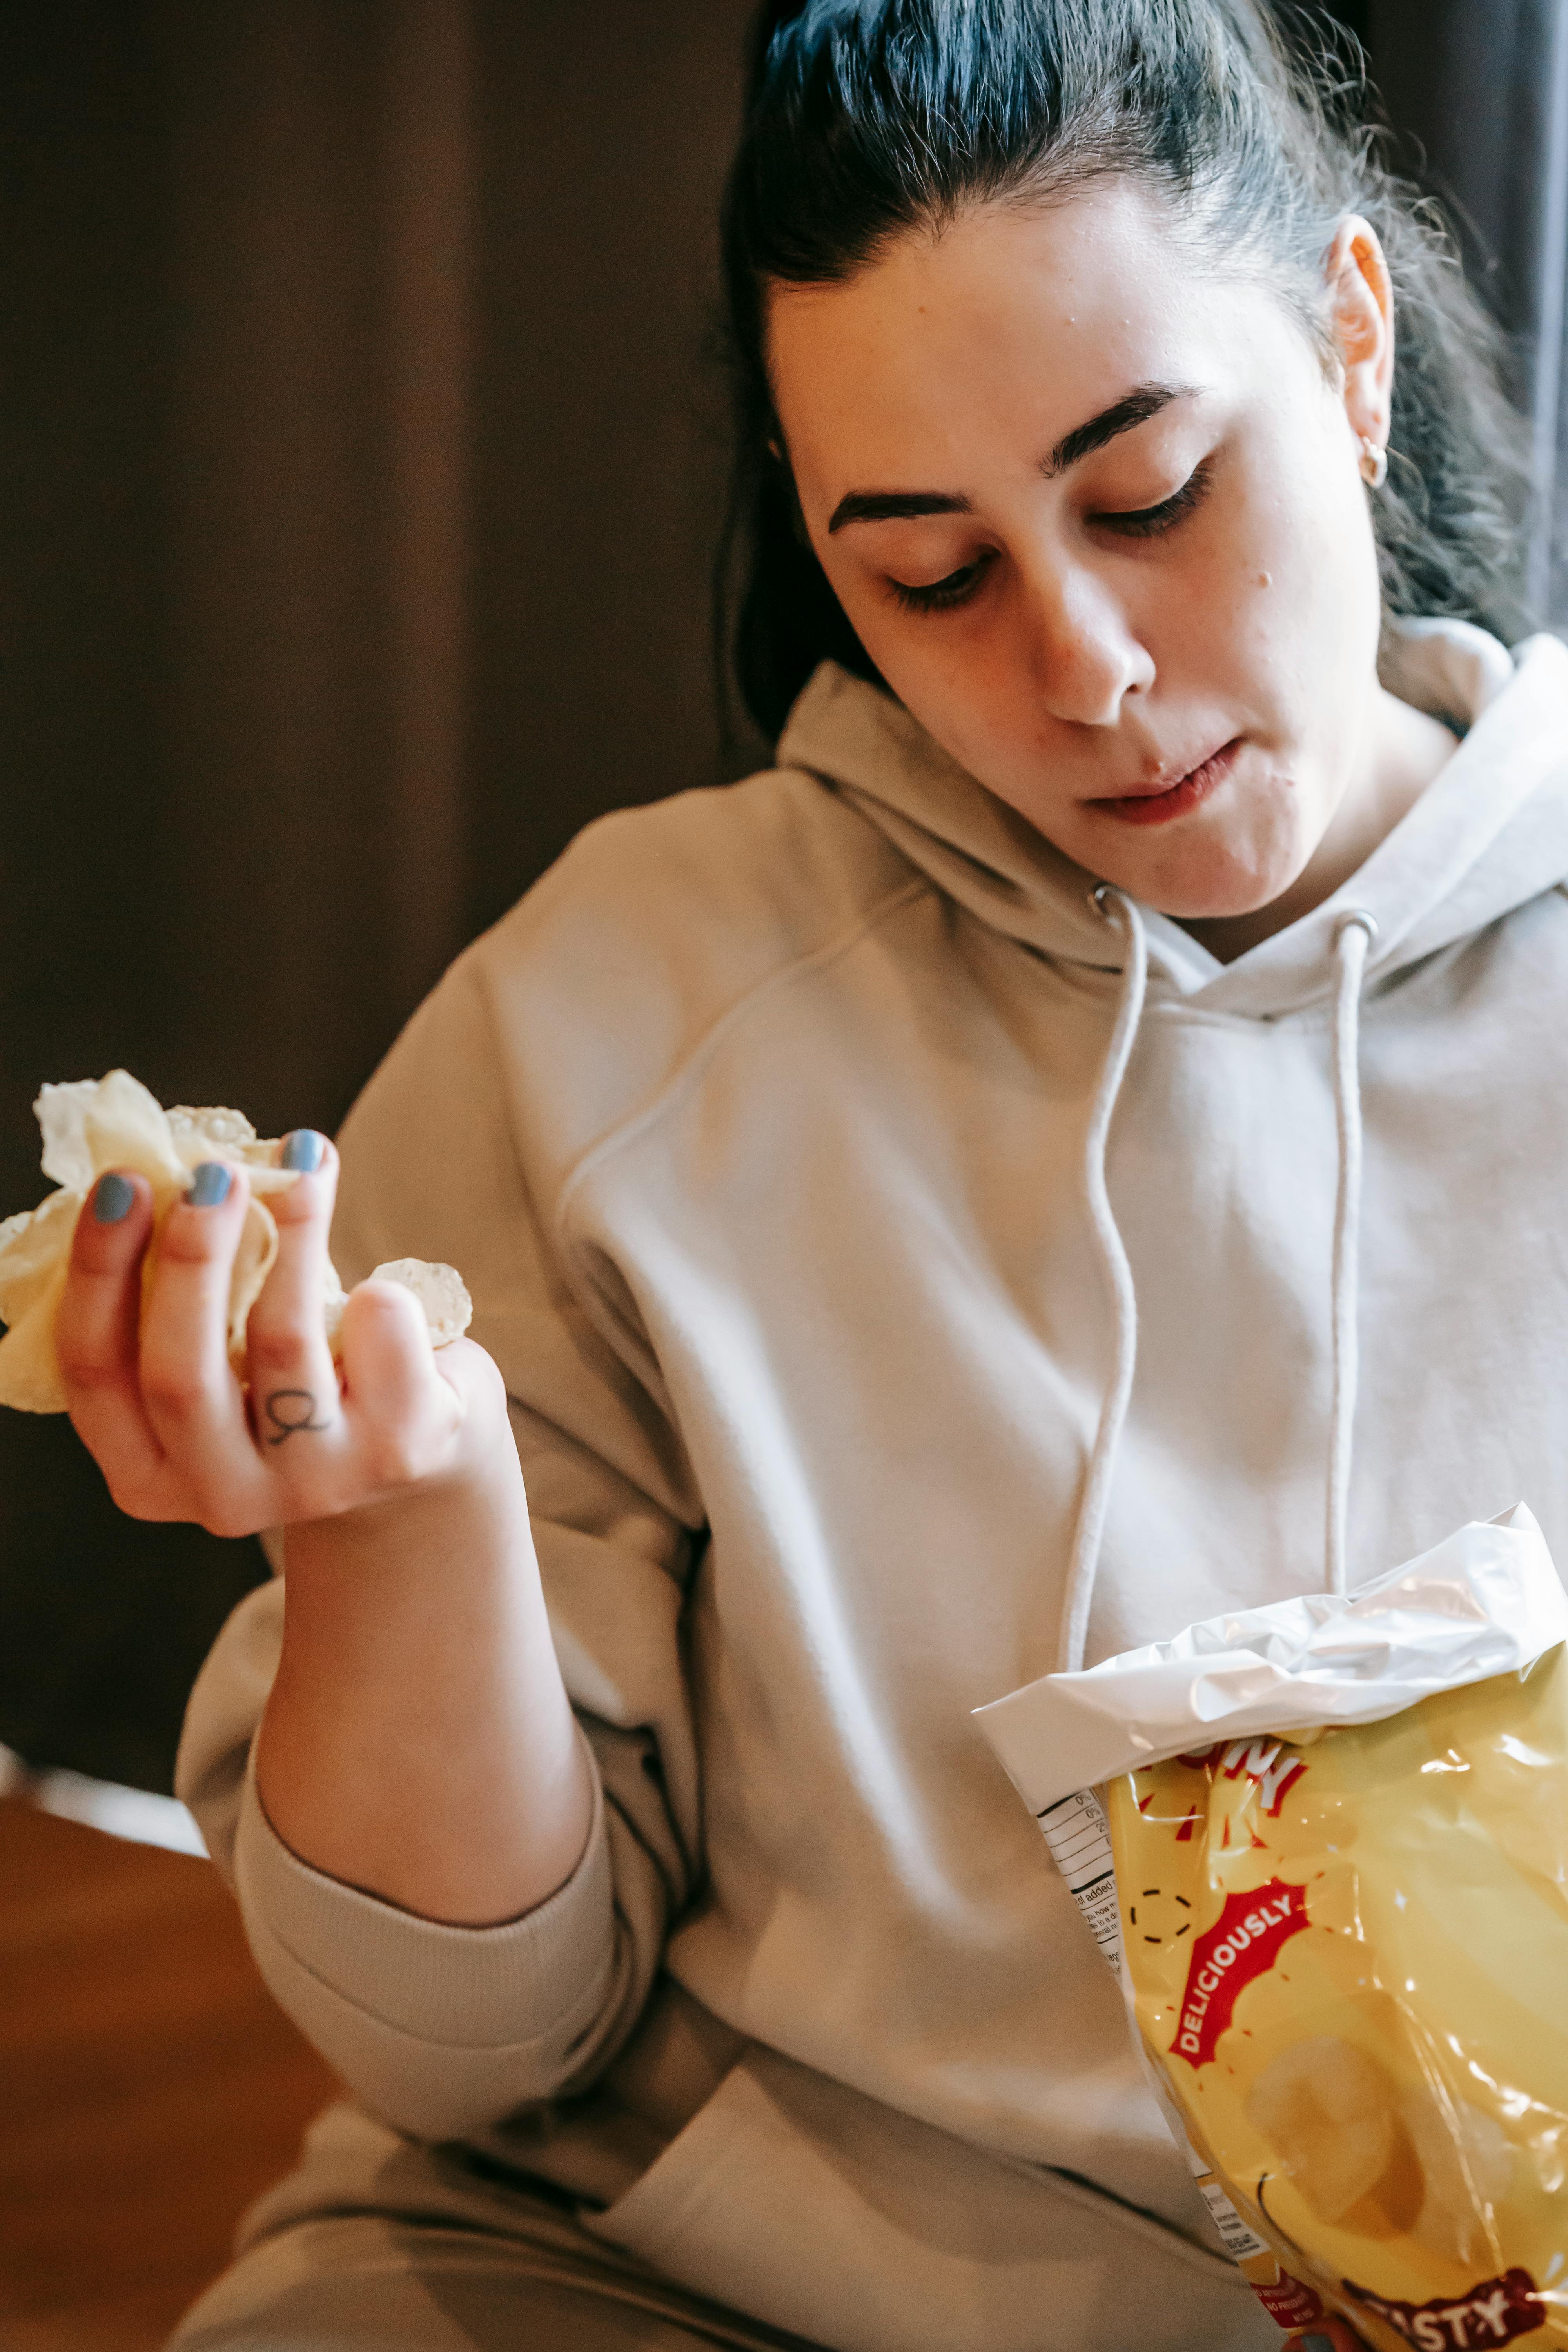 A woman eating chips | Source: Pexels